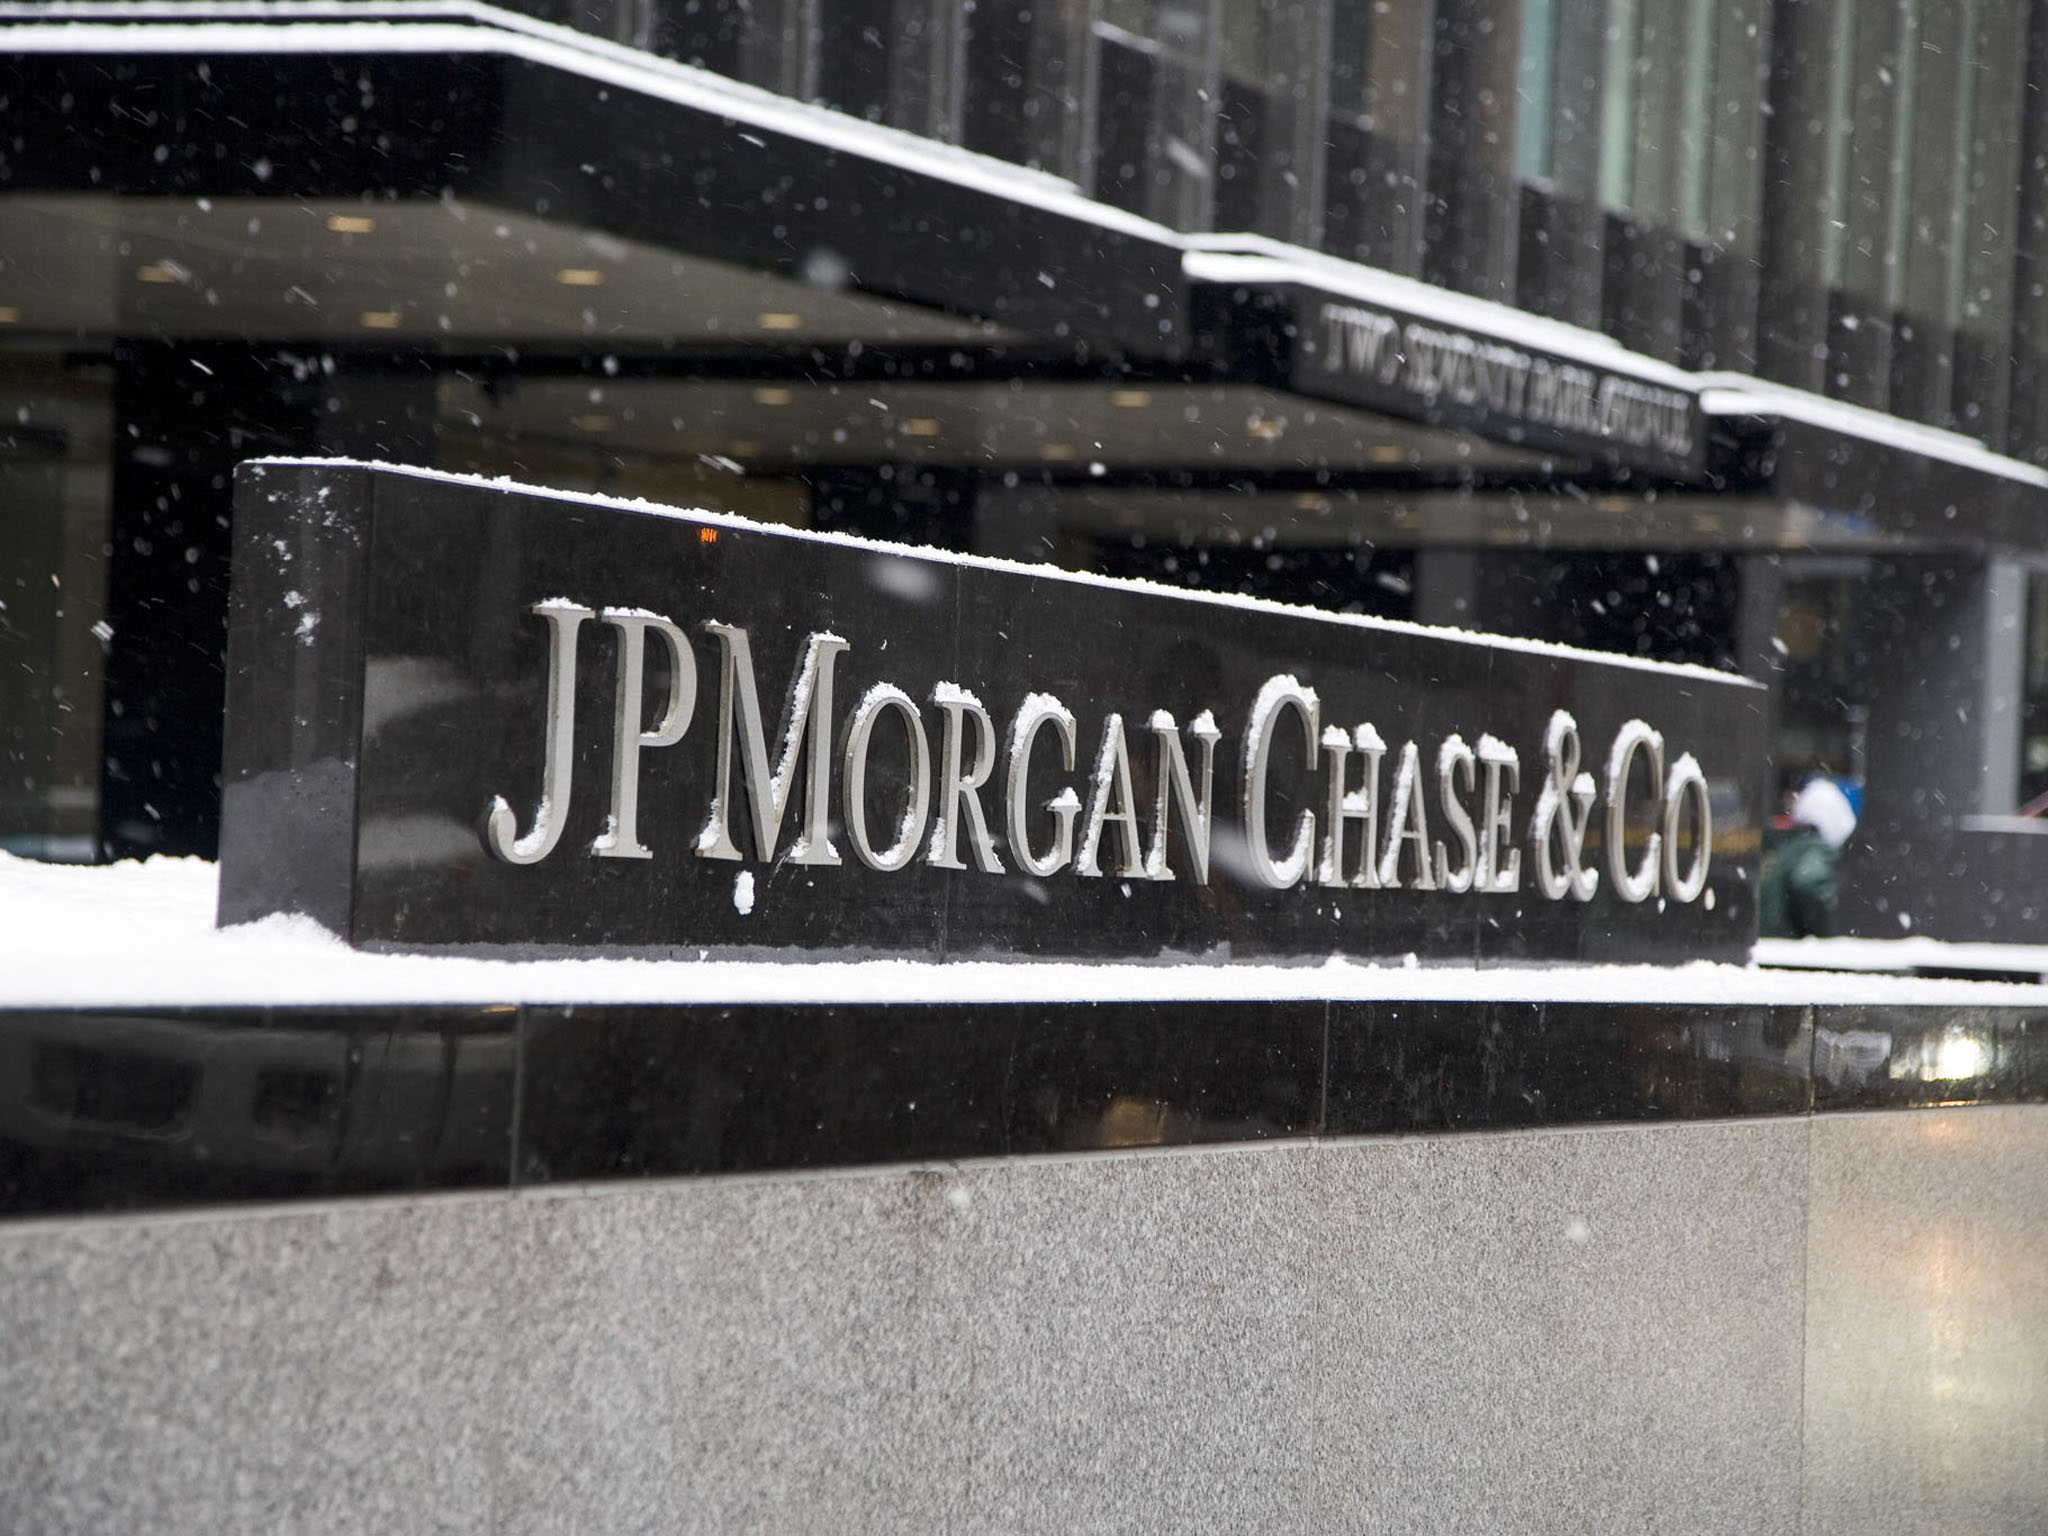 JPMorgan Chase to make tech projects a 'major priority' in focusing on areas such as blockchain technology, big data and robotics. Crain's New York Business